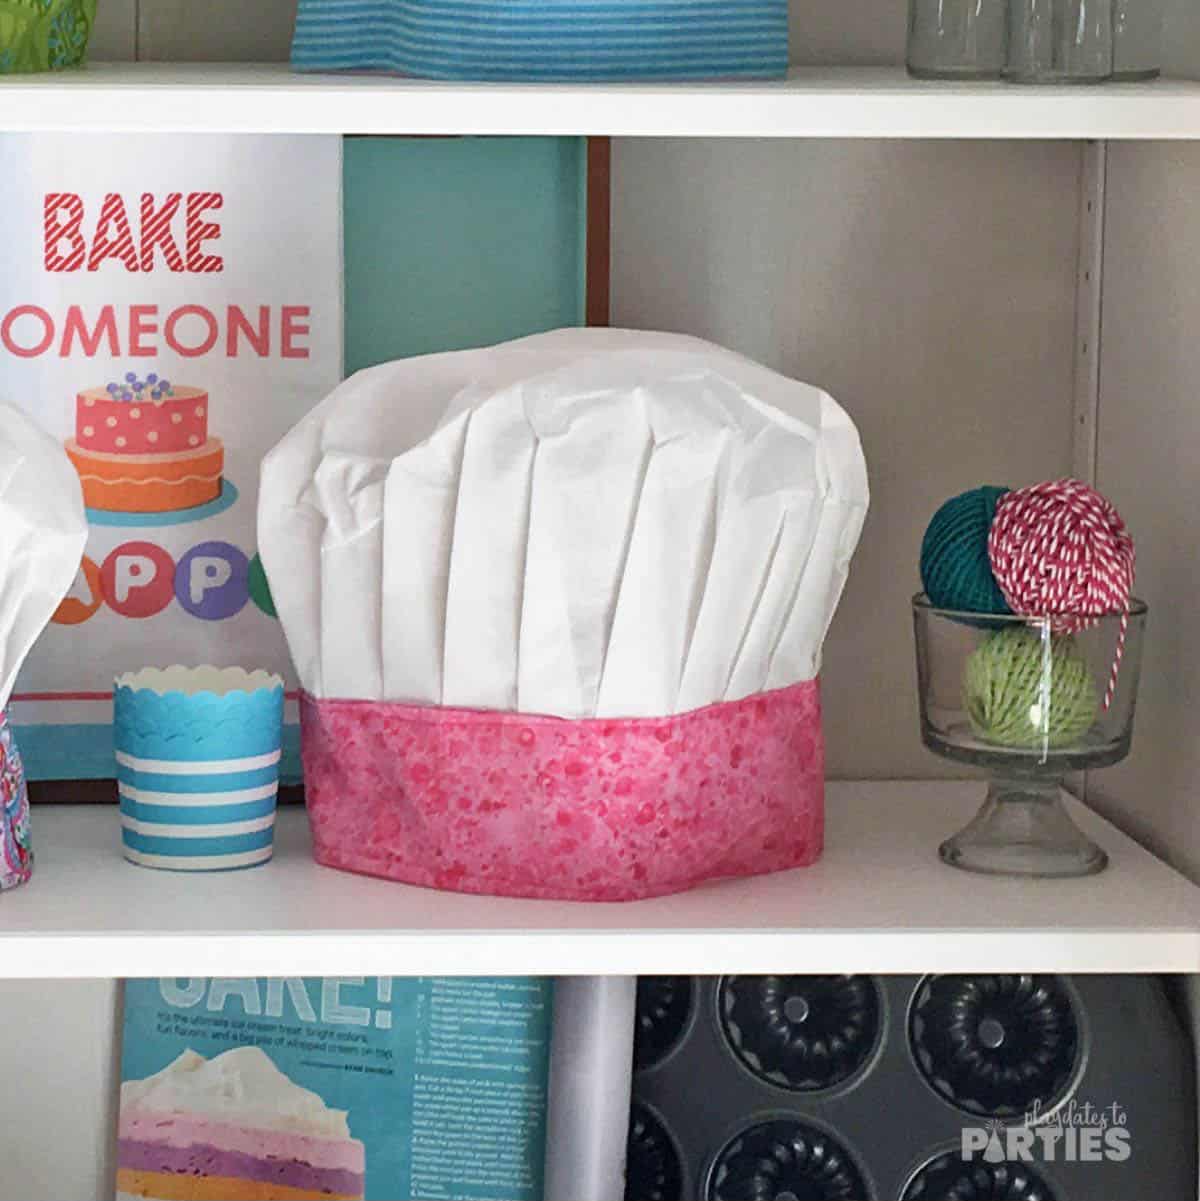 A fabric chef hat with a colorful band surrounded by baking supplies.